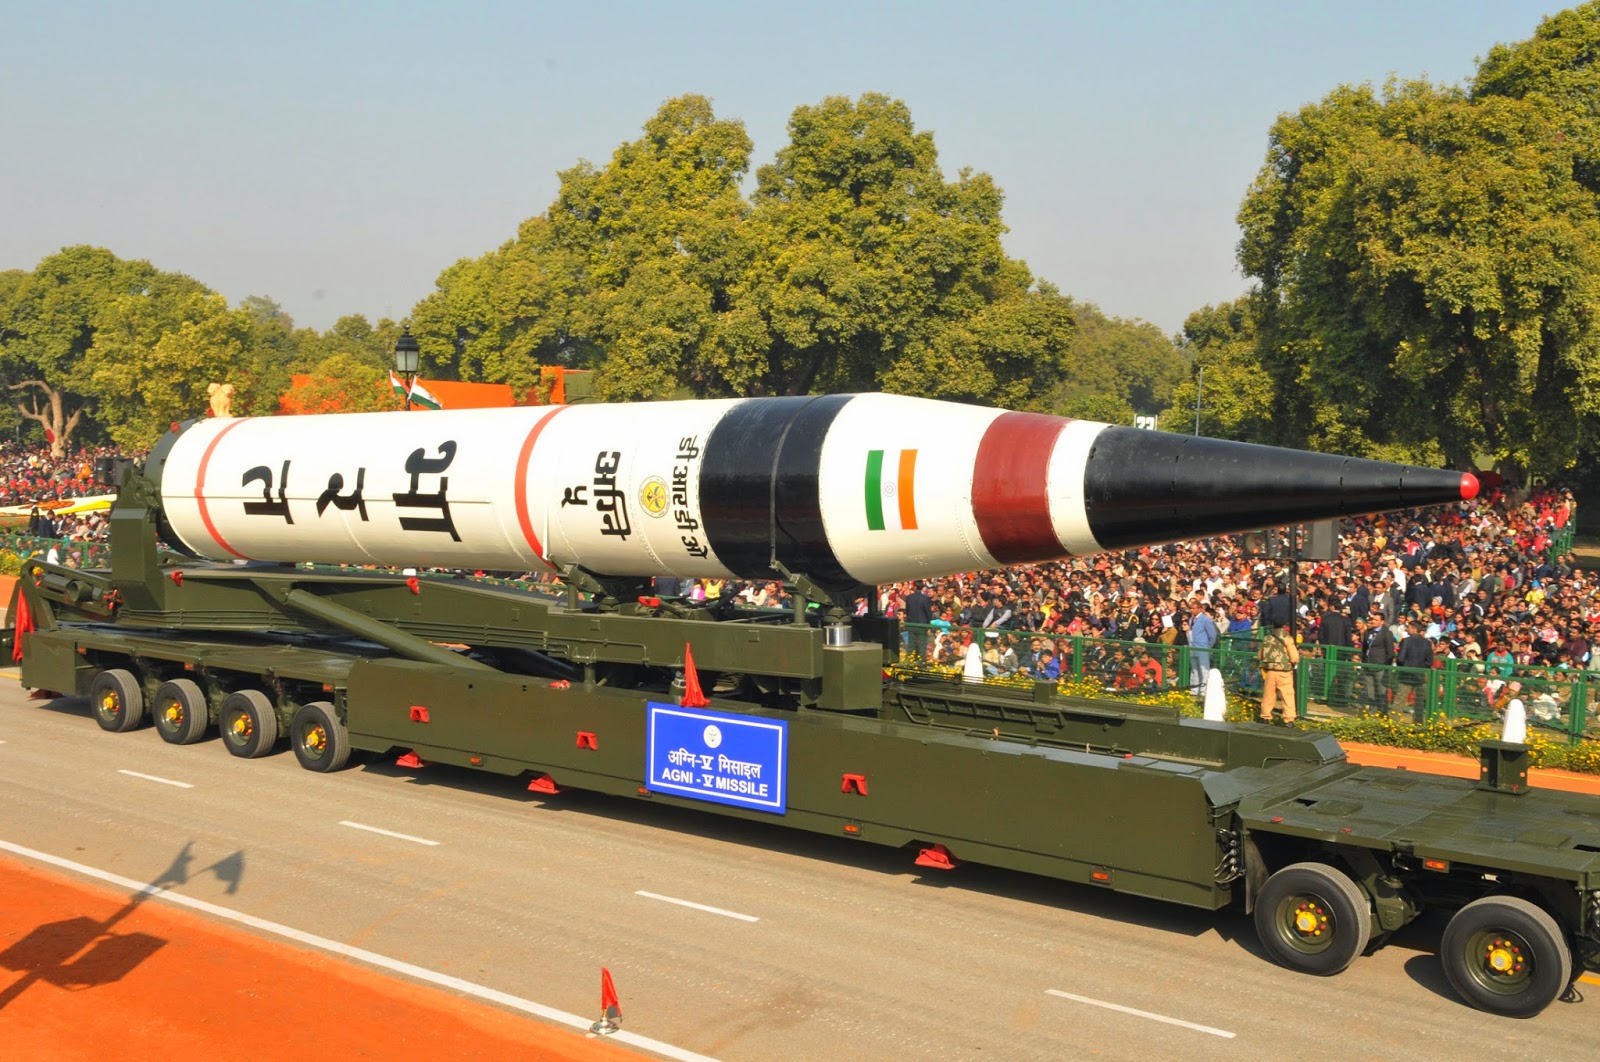 Missiles Wallpaper Download Free - India Republic Day Weapons Parade , HD Wallpaper & Backgrounds